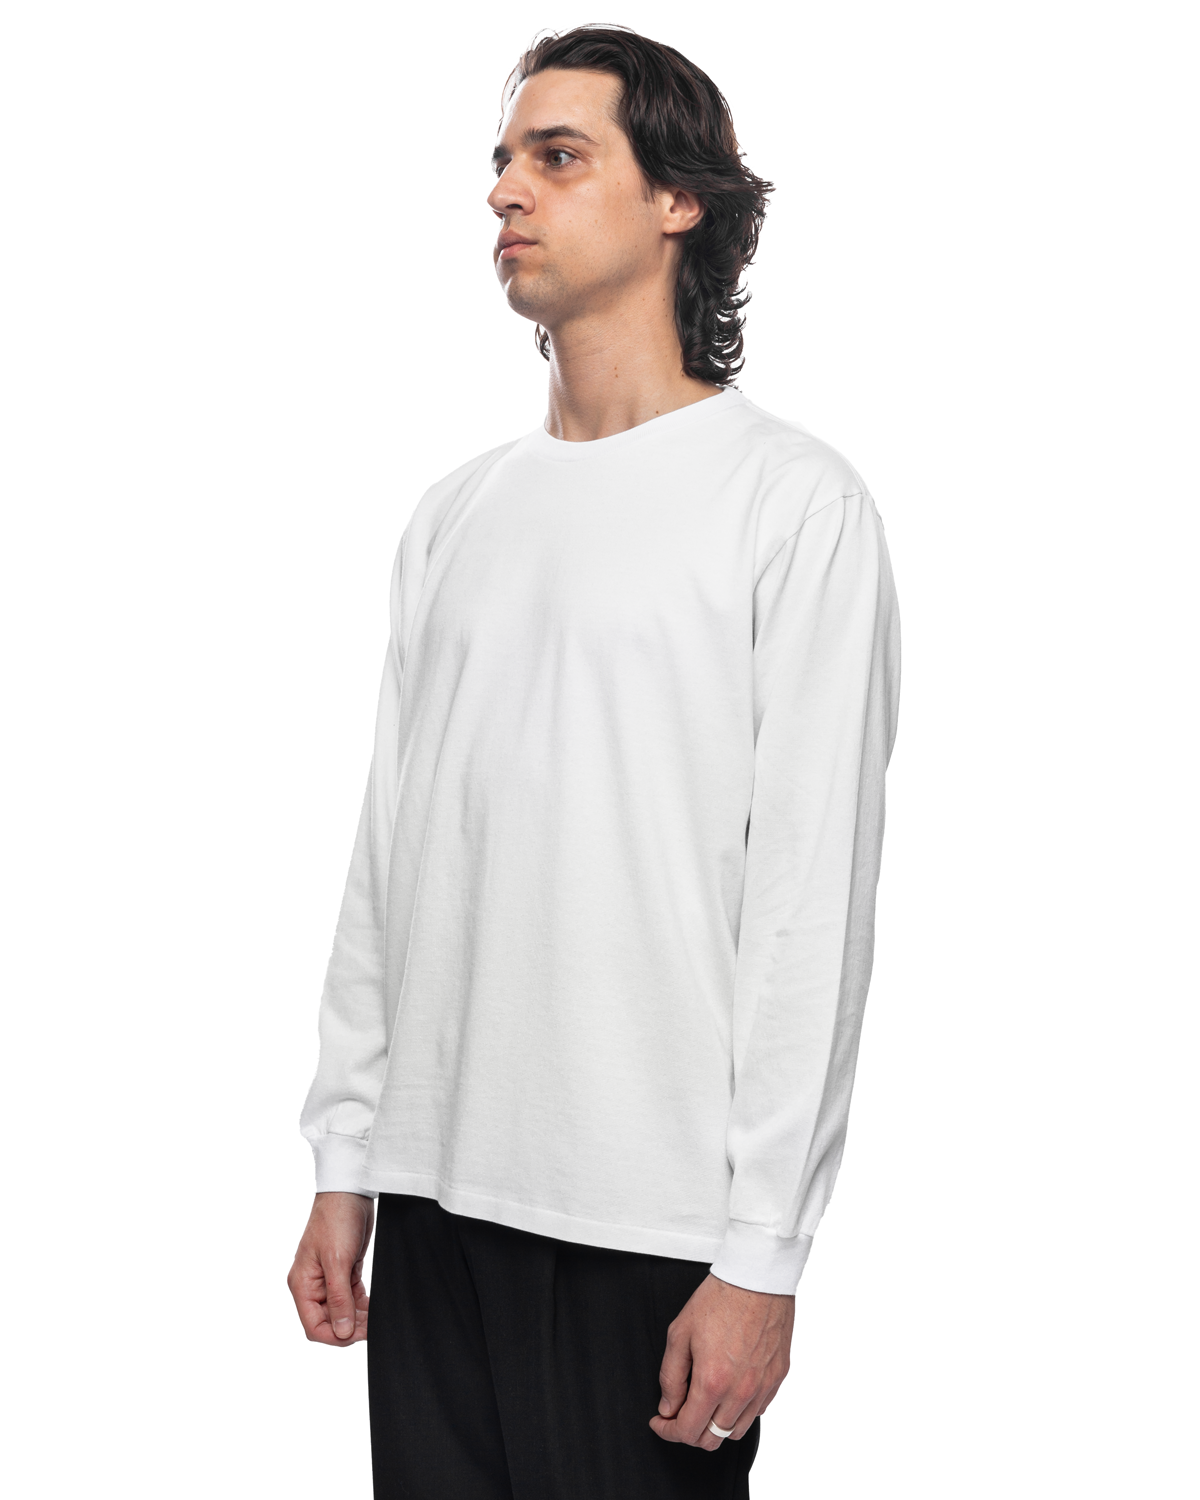 Luster Plaiting L/S Tee White